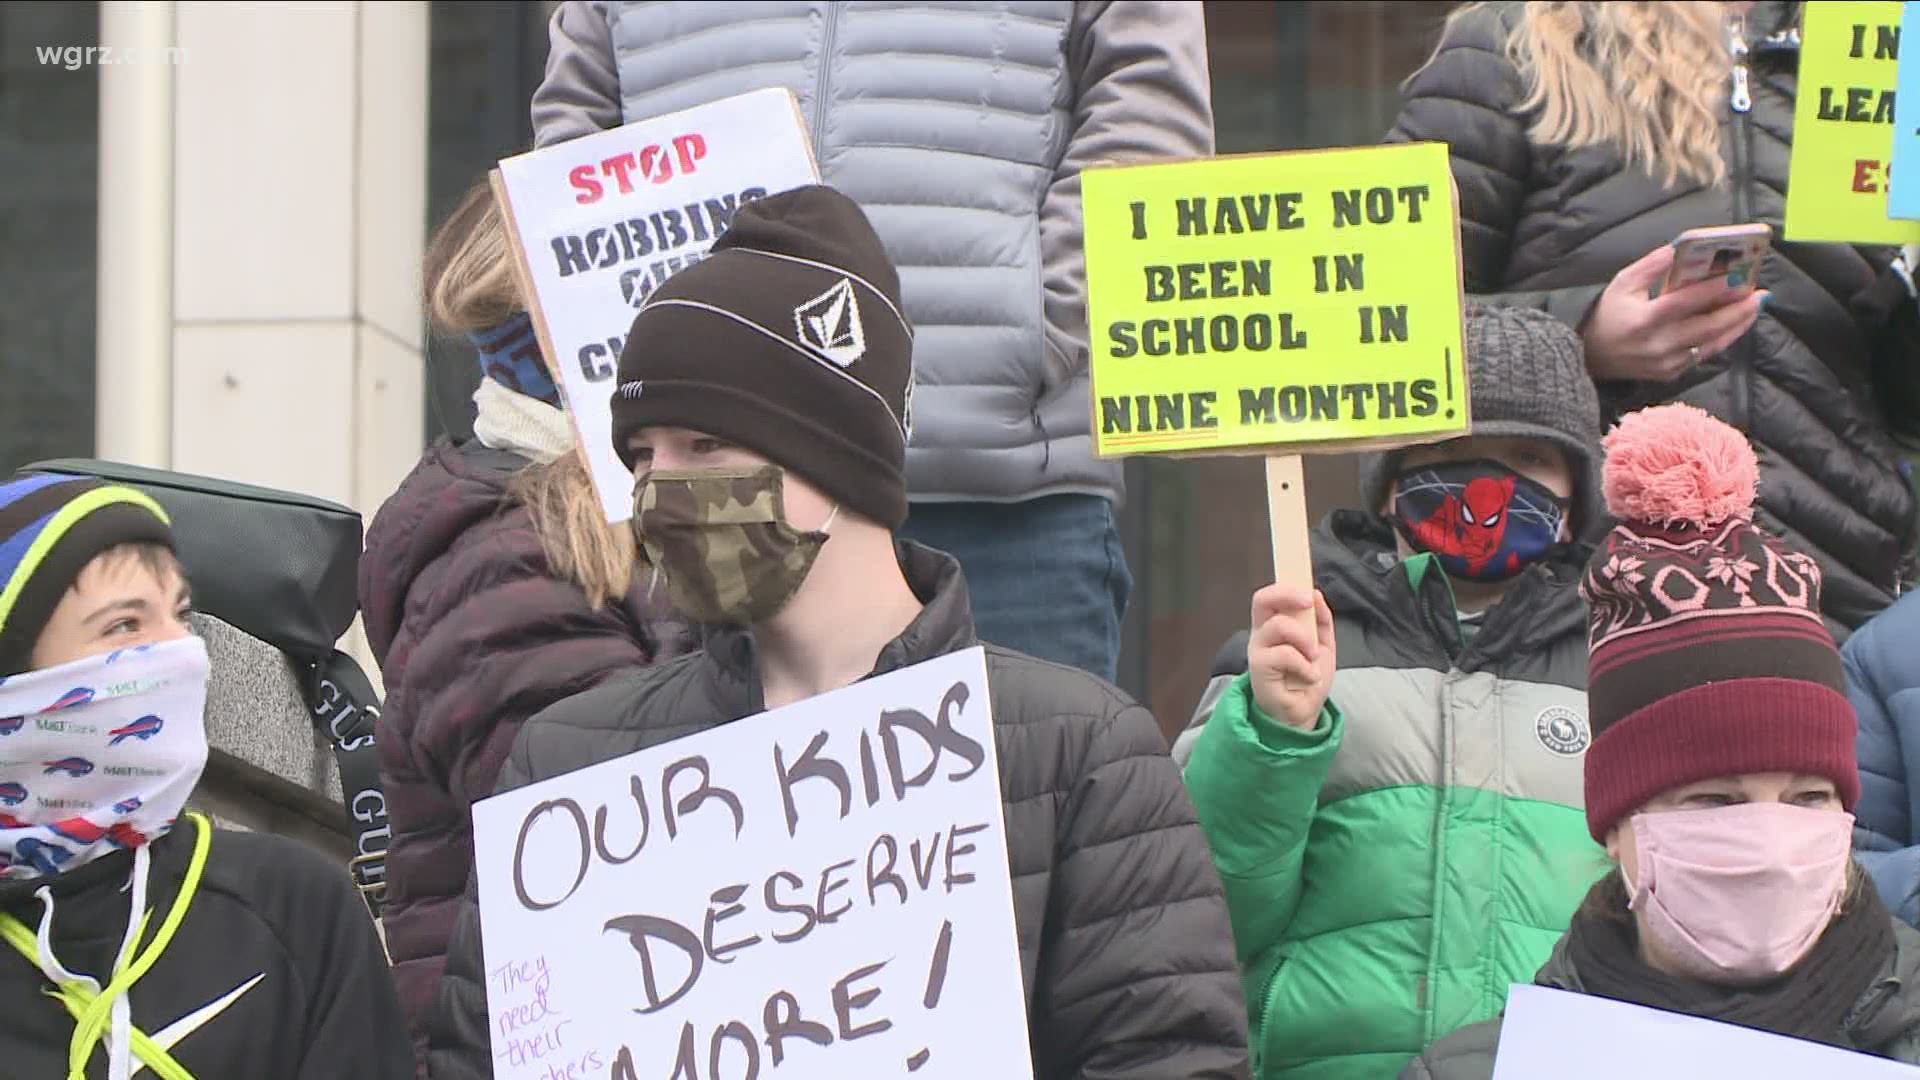 The Rath Building protest comes just two days after the state released new relaxed COVID-19 testing guidelines for schools in certain color zones.